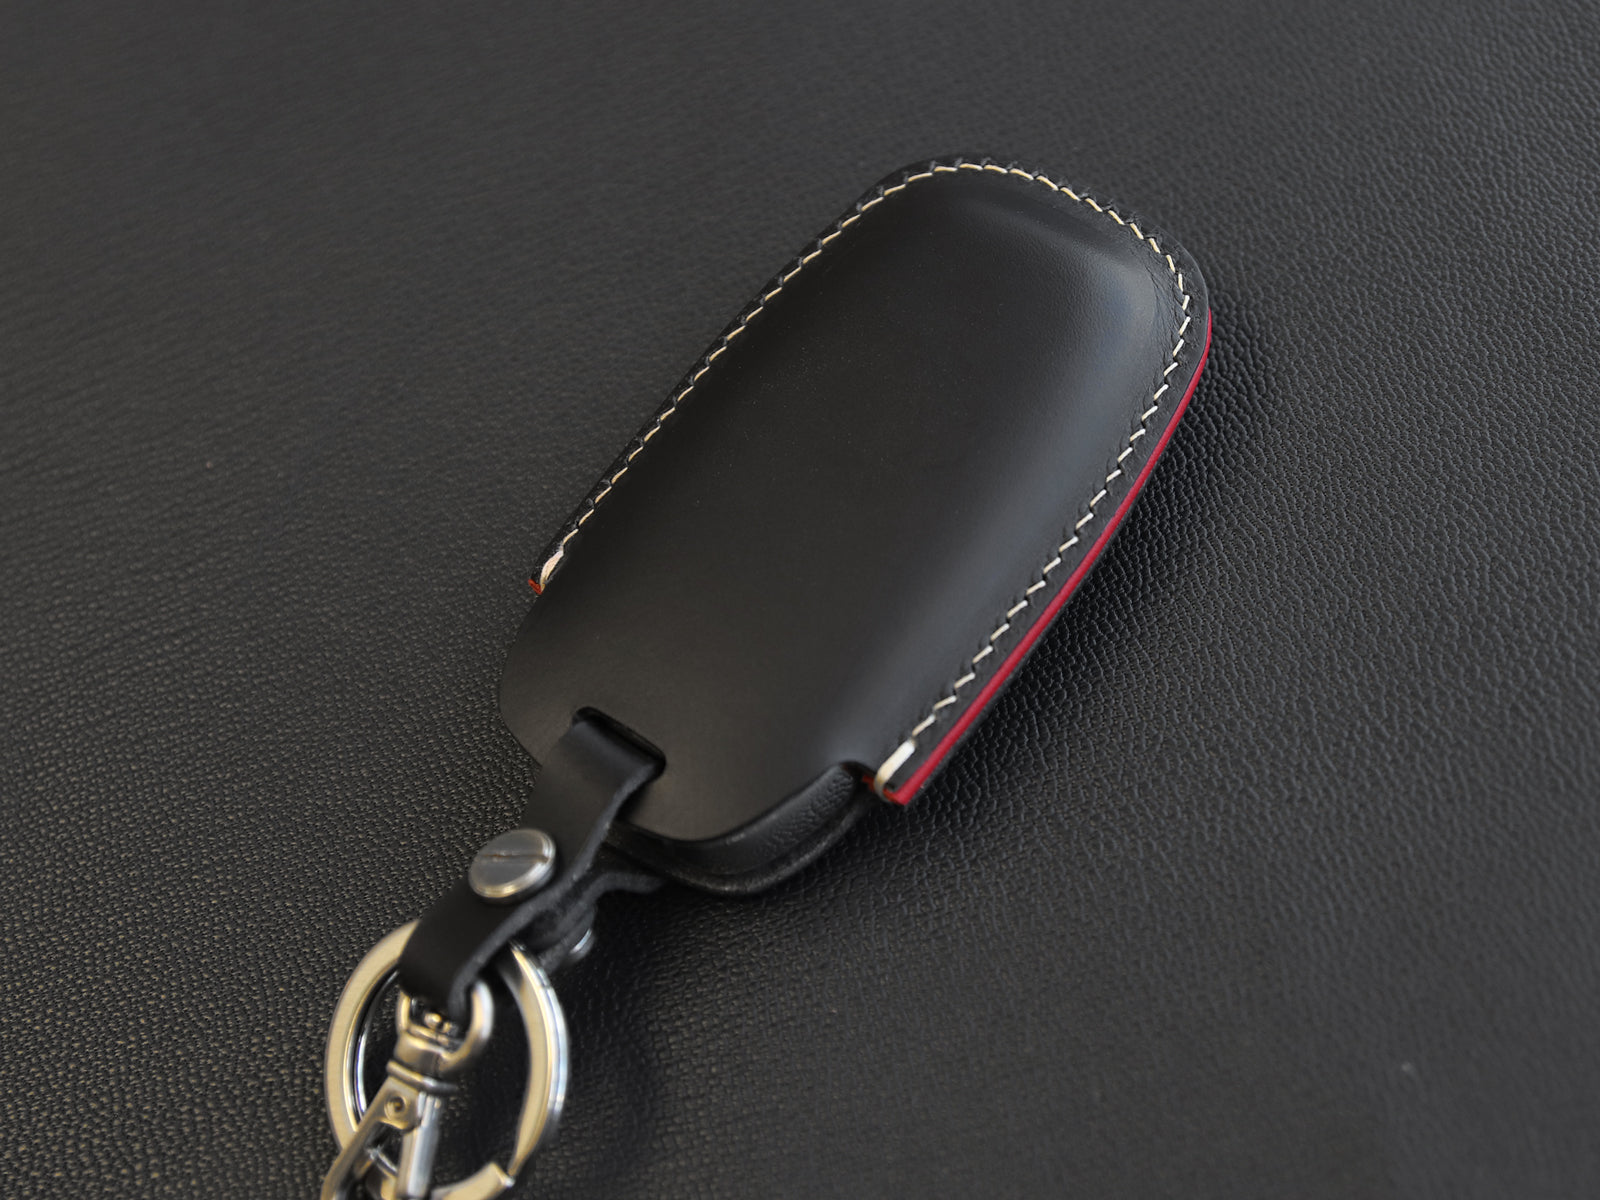 Audi Series [1] Key Fob Cover Leather Case - A3 A4 A5 A6 A7 S5, S7 Q5 RS - Handcrafted in USA